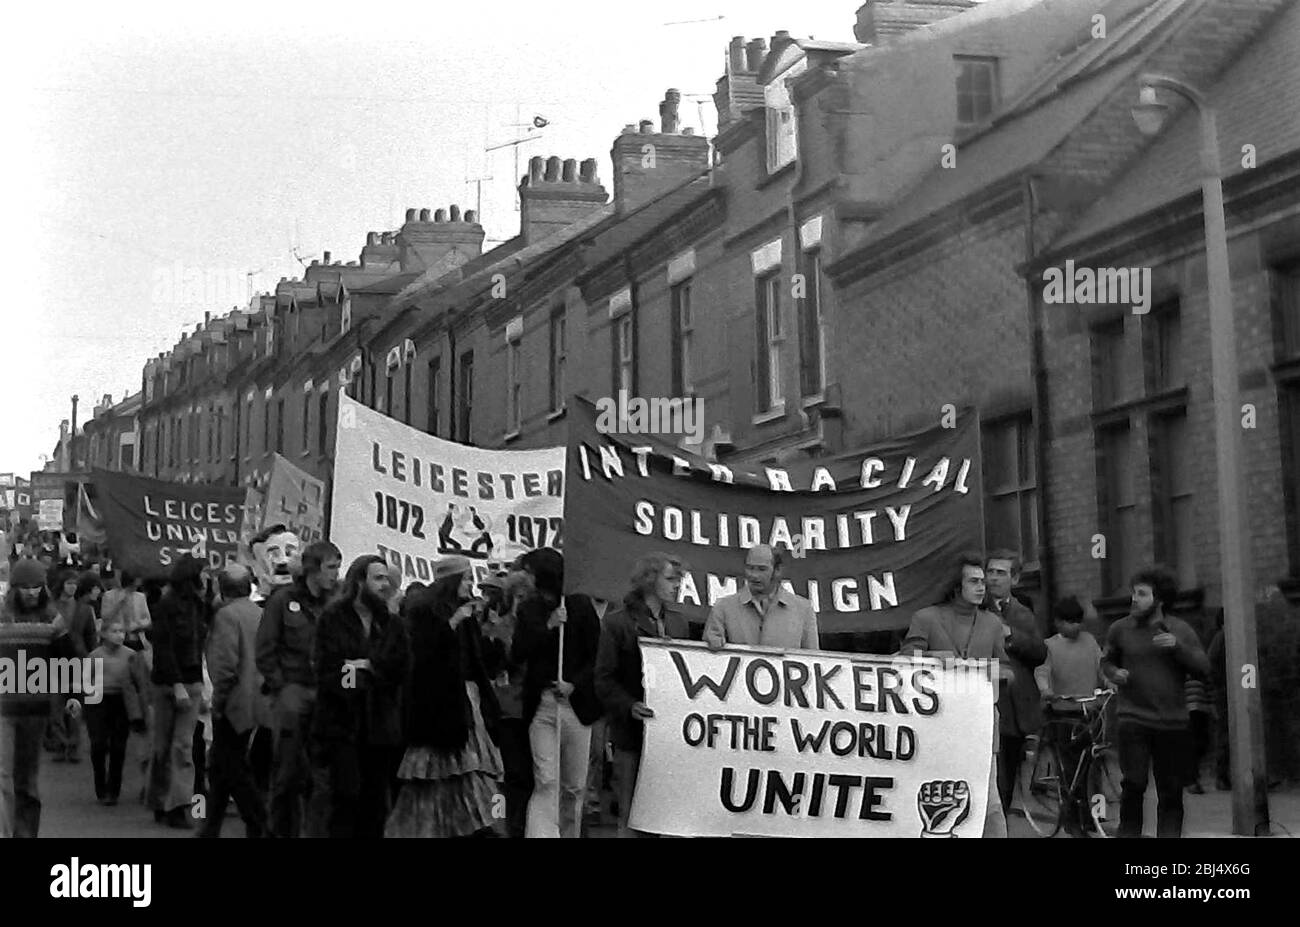 Demonstrators carrying banners, including one that says: 'Workers of the World Unite', take part in an anti racism demonstration in Leicester,  England, United Kingdom, British Isles, in 1972. Stock Photo